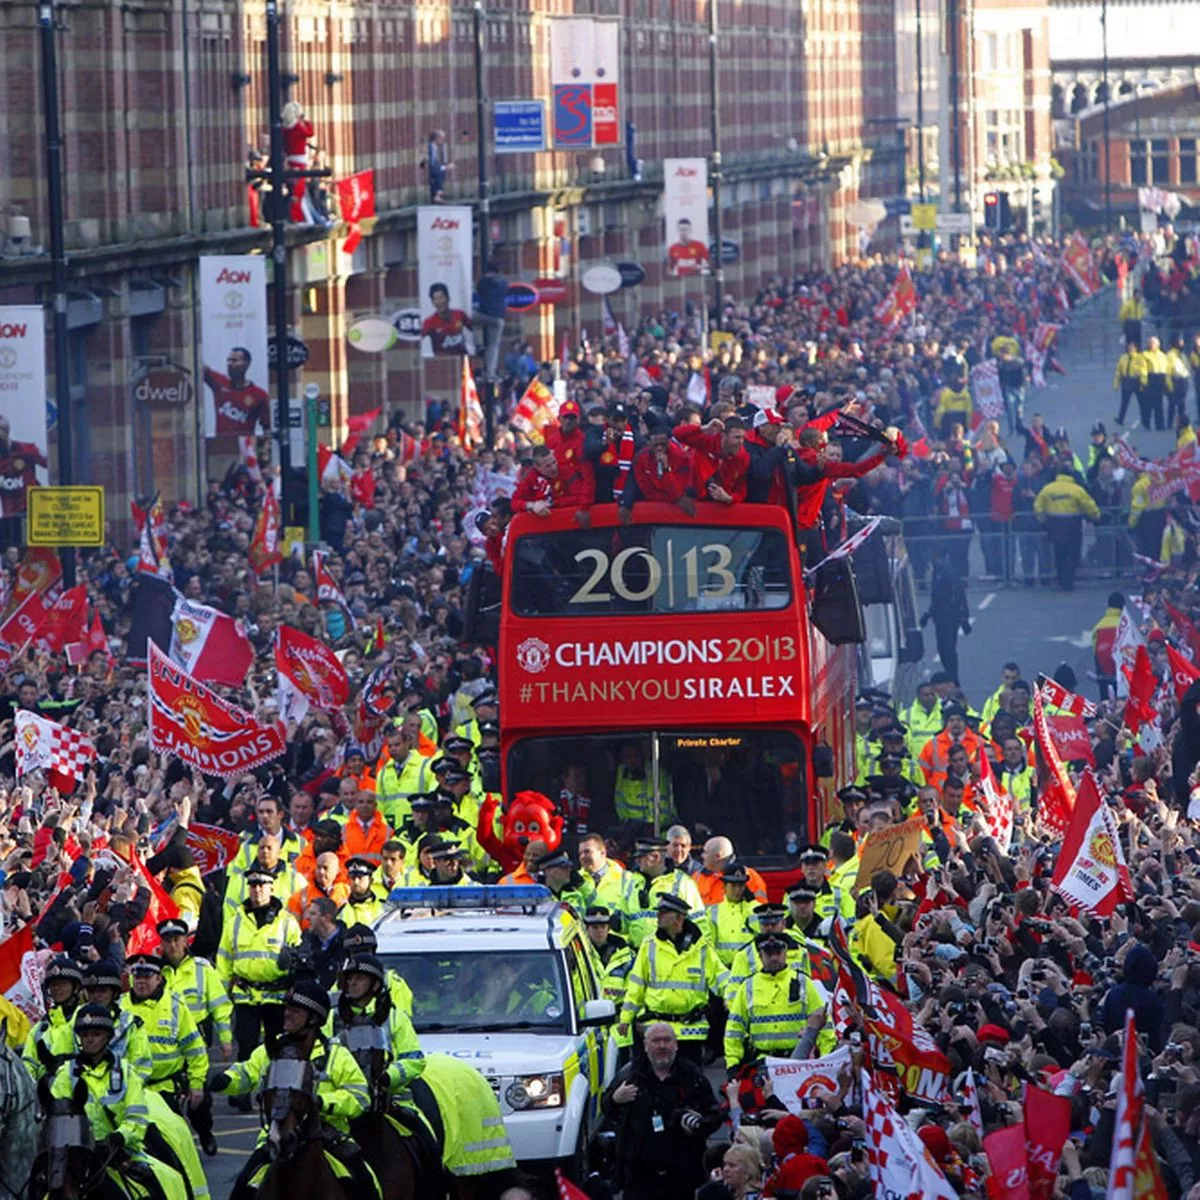 The-Manchester-United-team-bus-on-the-streets-of-Manchester.jpg